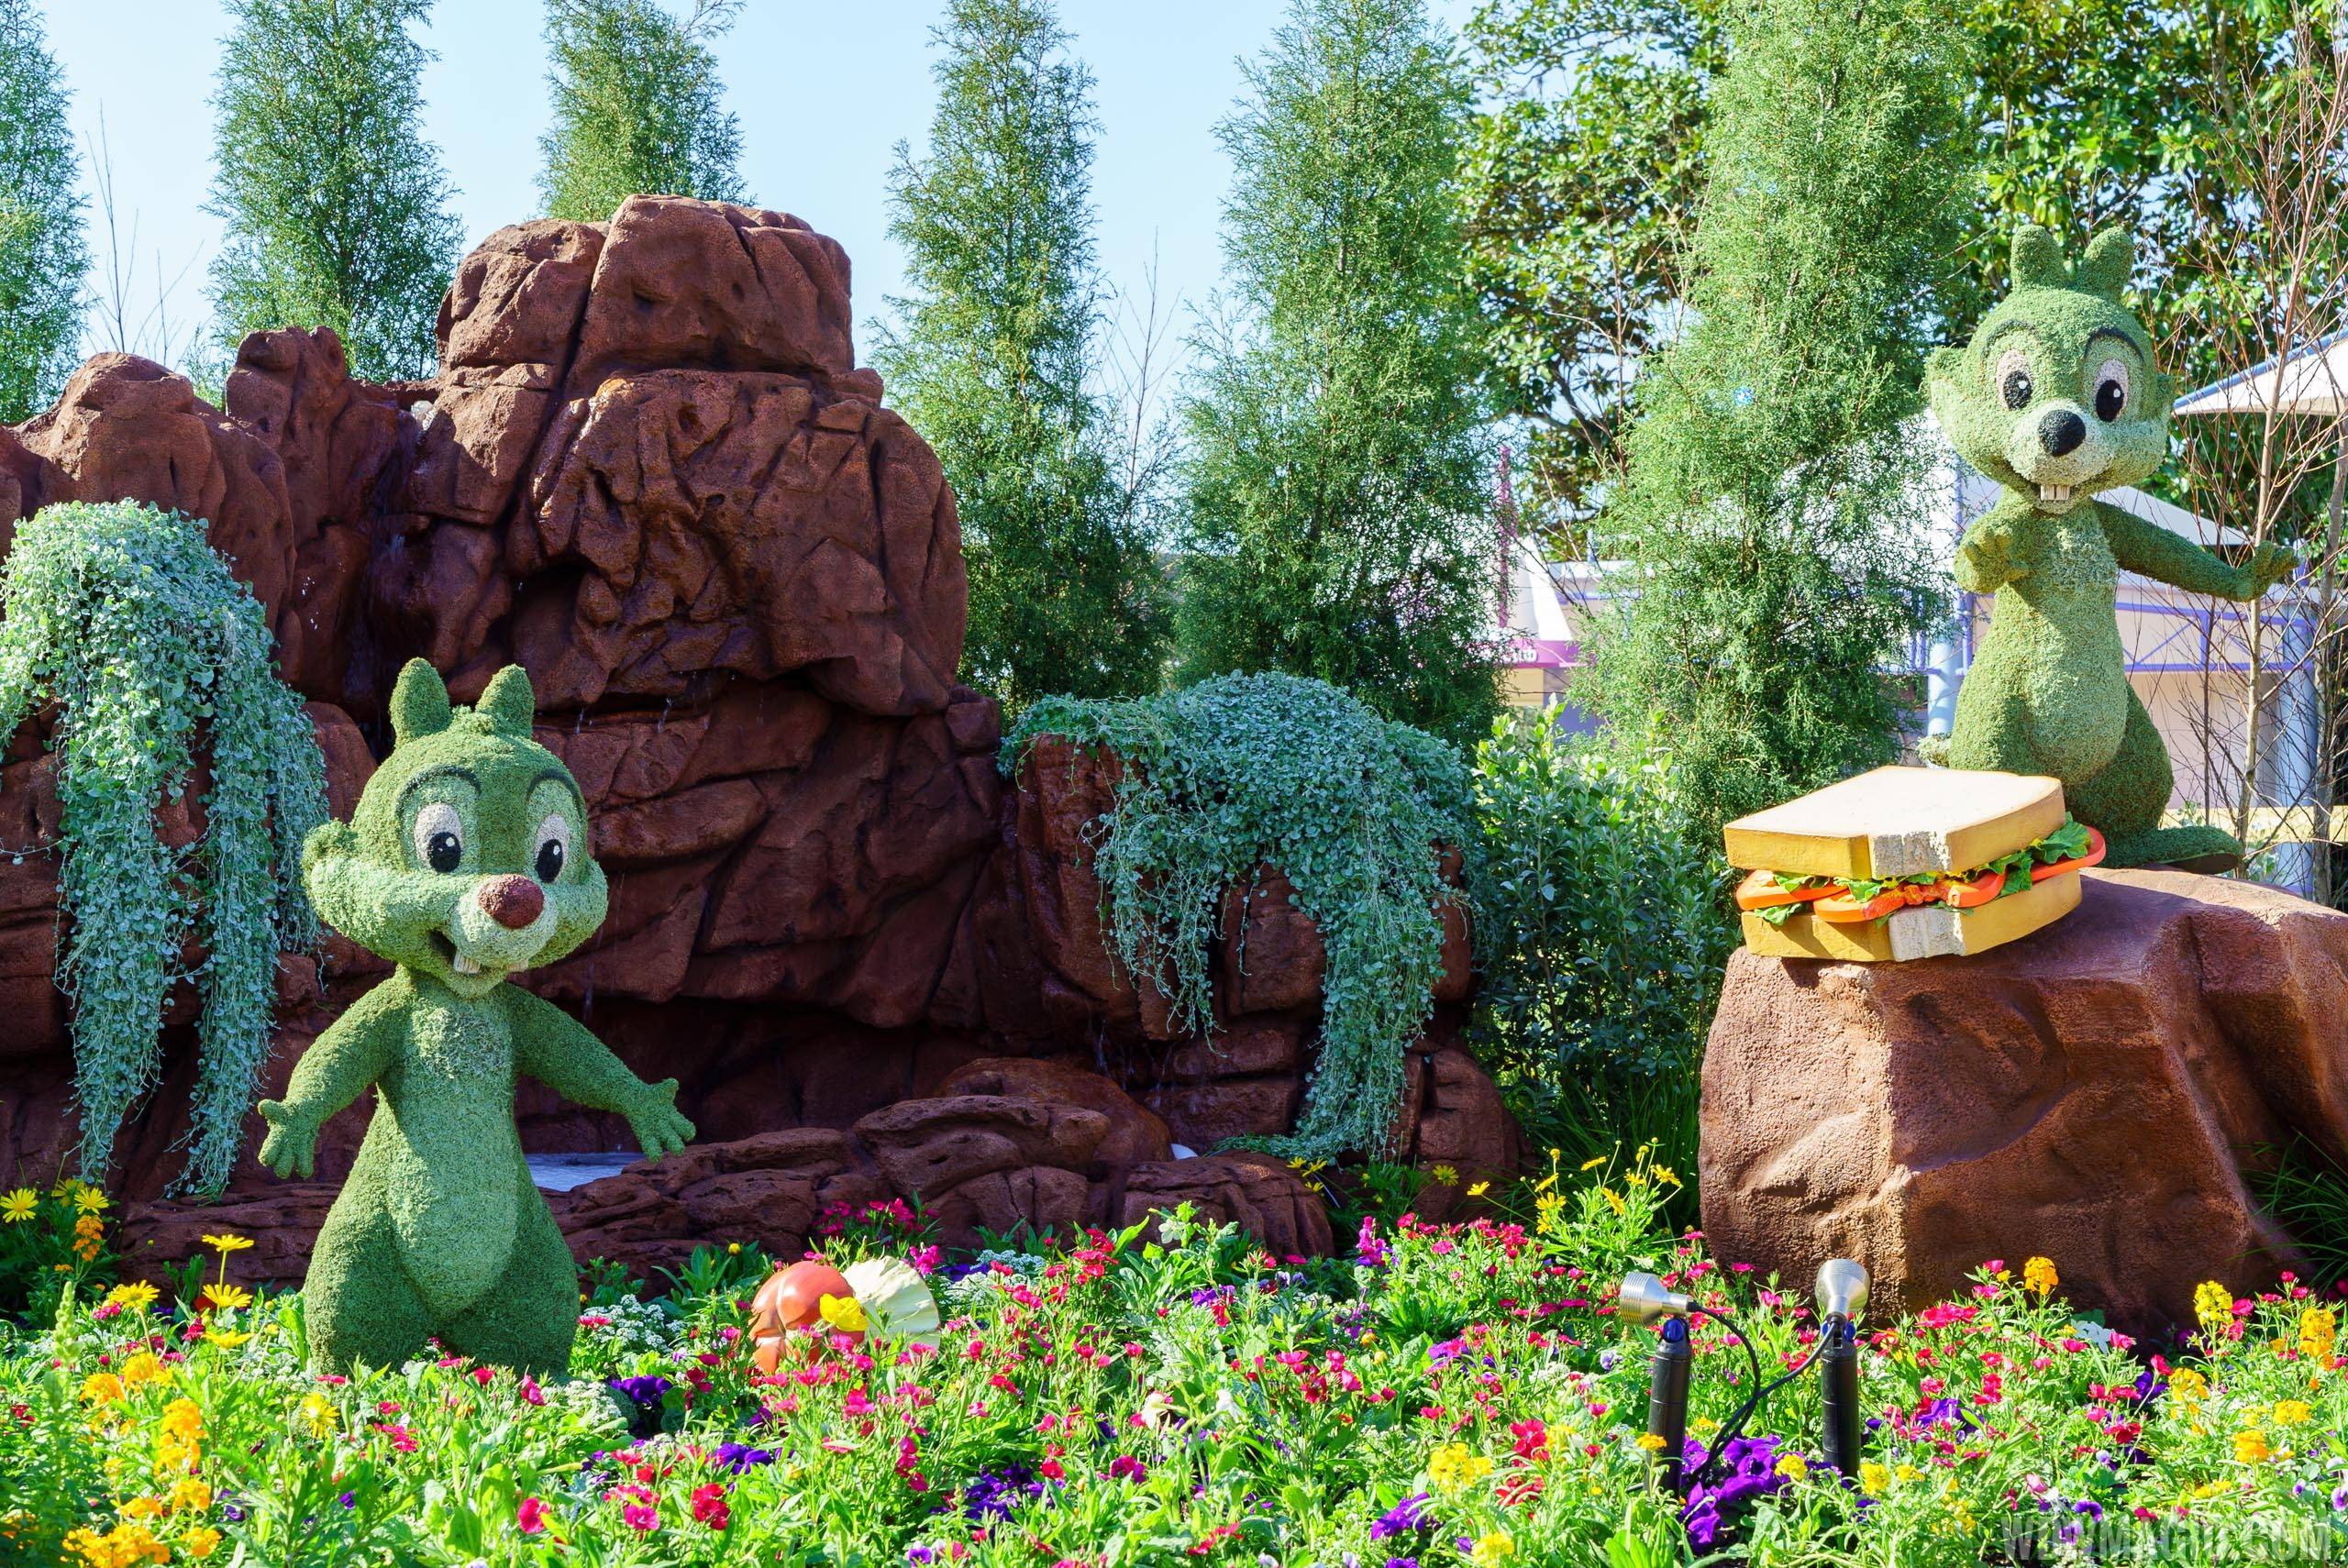 2016 Epcot International Flower and Garden Festival - Chip and Dale